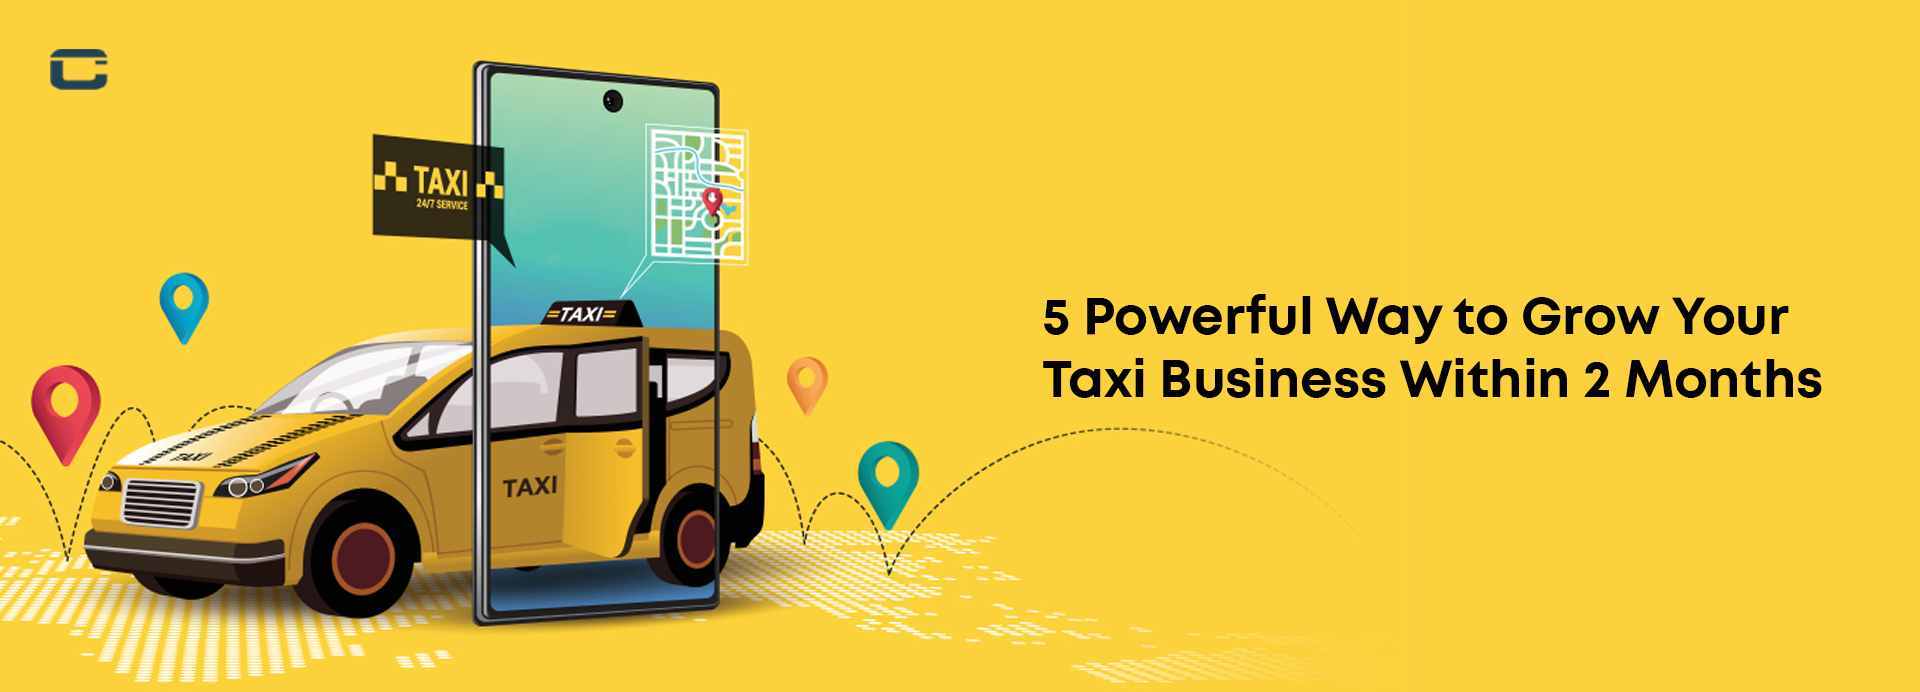 5 Powerful Ways to Grow Your Taxi Business Within 2 Months